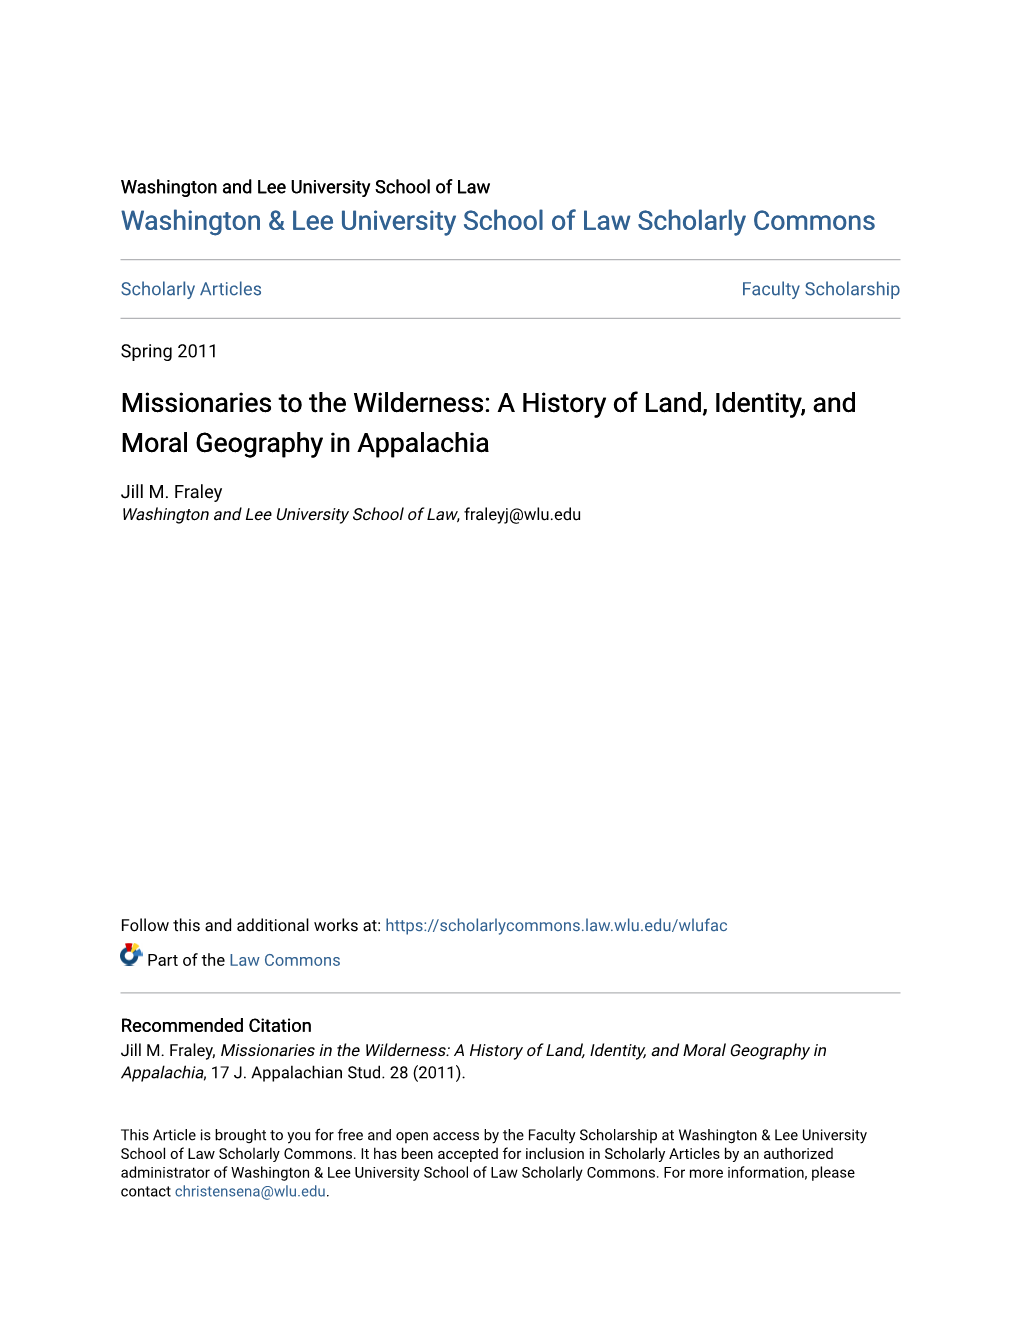 Missionaries to the Wilderness: a History of Land, Identity, and Moral Geography in Appalachia